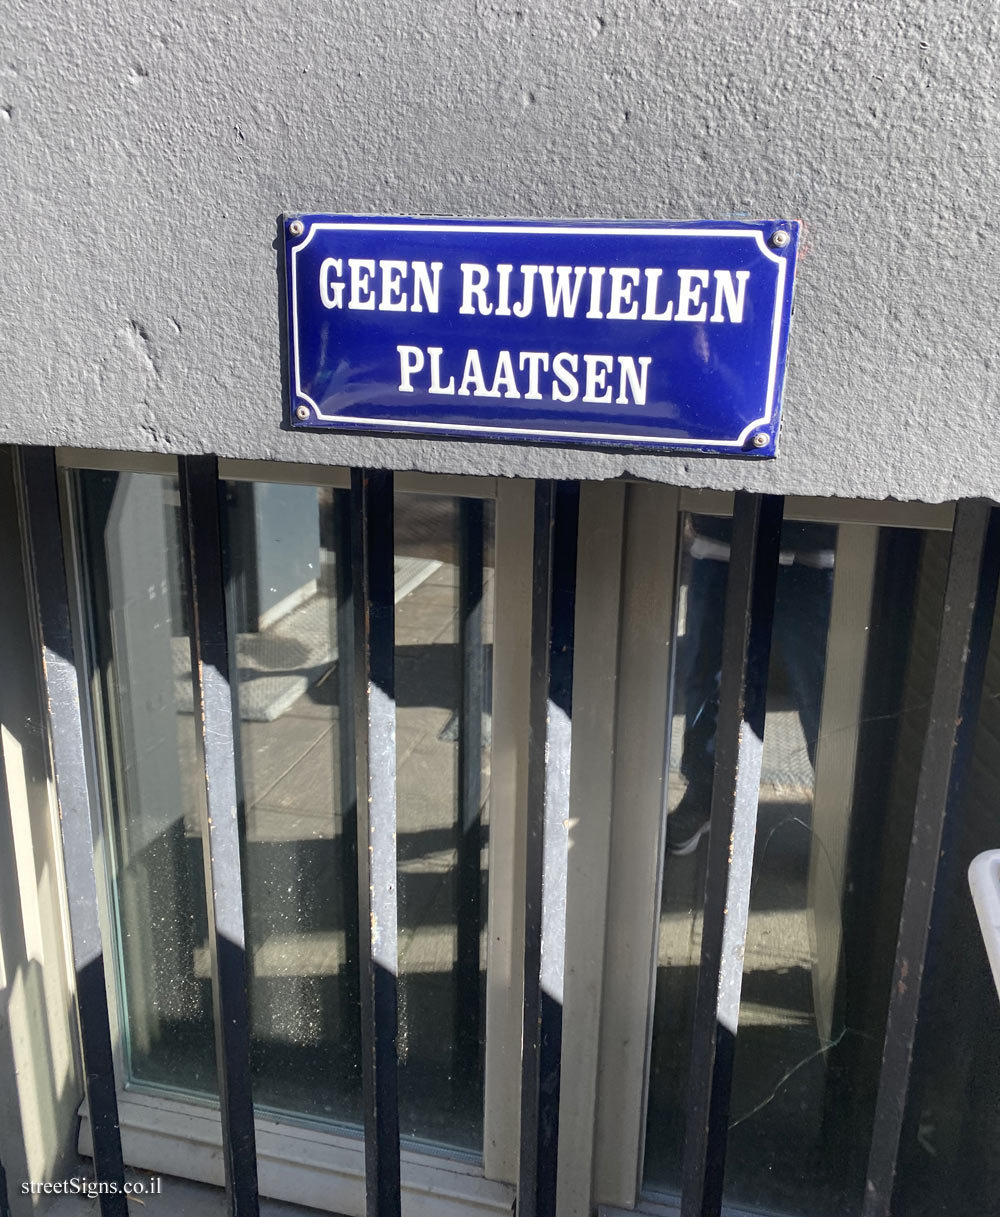 Rotterdam - a warning against tying a bicycle in the shape of a street name sign - Eendrachtsstraat 41, 3012 XH Rotterdam, Netherlands